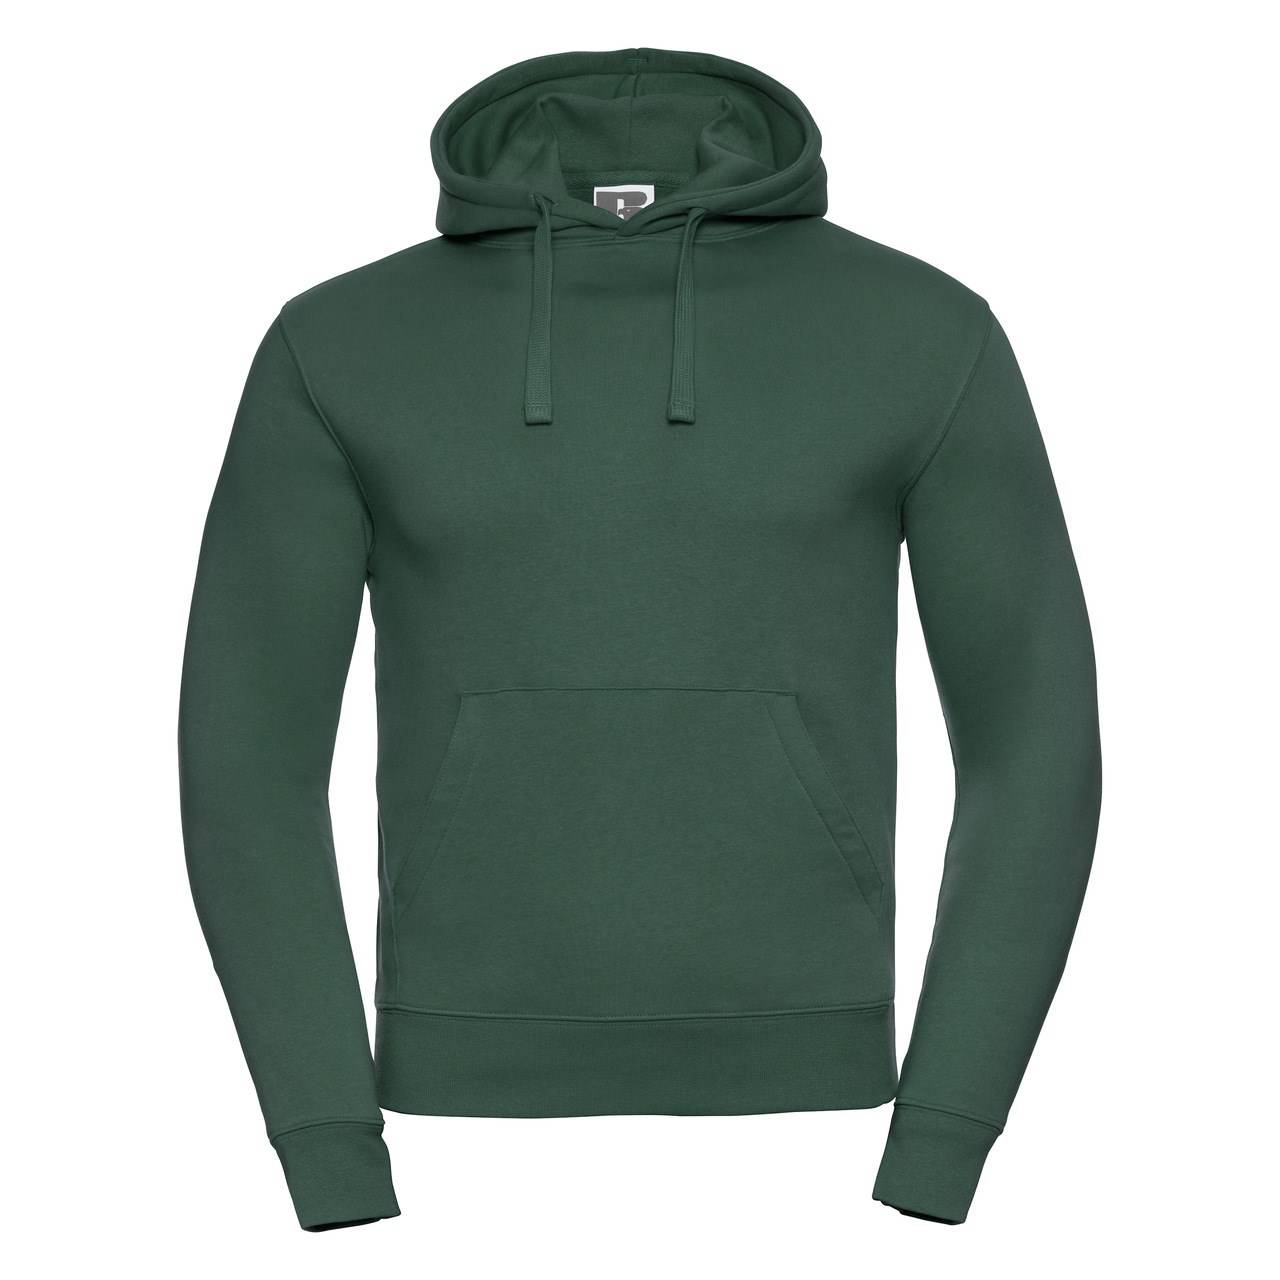 Green men's hoodie Authentic Russell